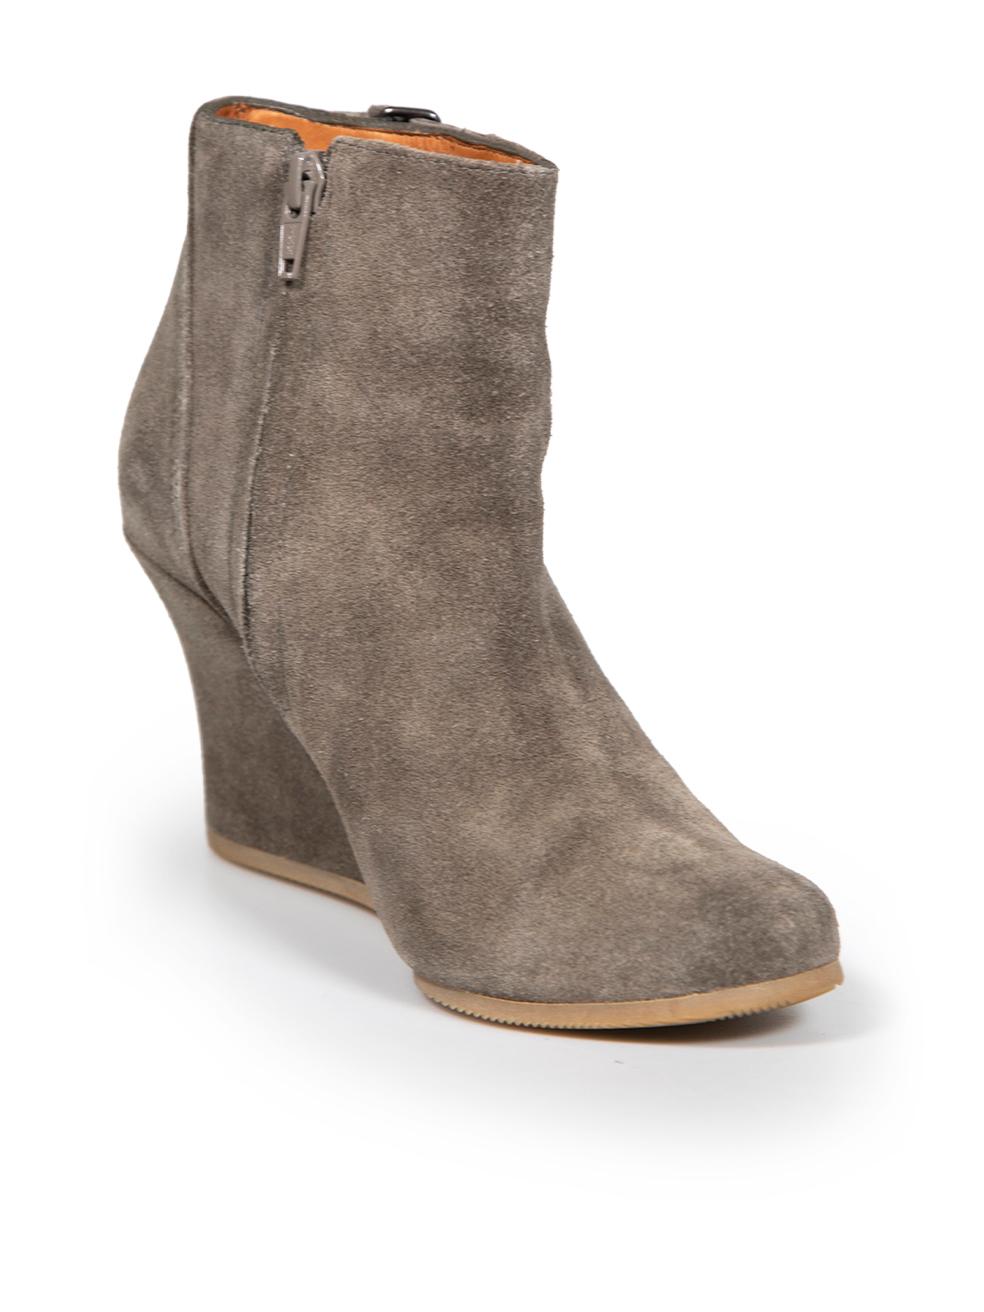 CONDITION is Very good. Minimal wear to boots is evident. Minimal wear to back right side heel where there are small abrasions along seam and at heel edge on this used Lanvin designer resale item.
 
 
 
 Details
 
 
 Grey
 
 Suede
 
 Ankle boots
 
